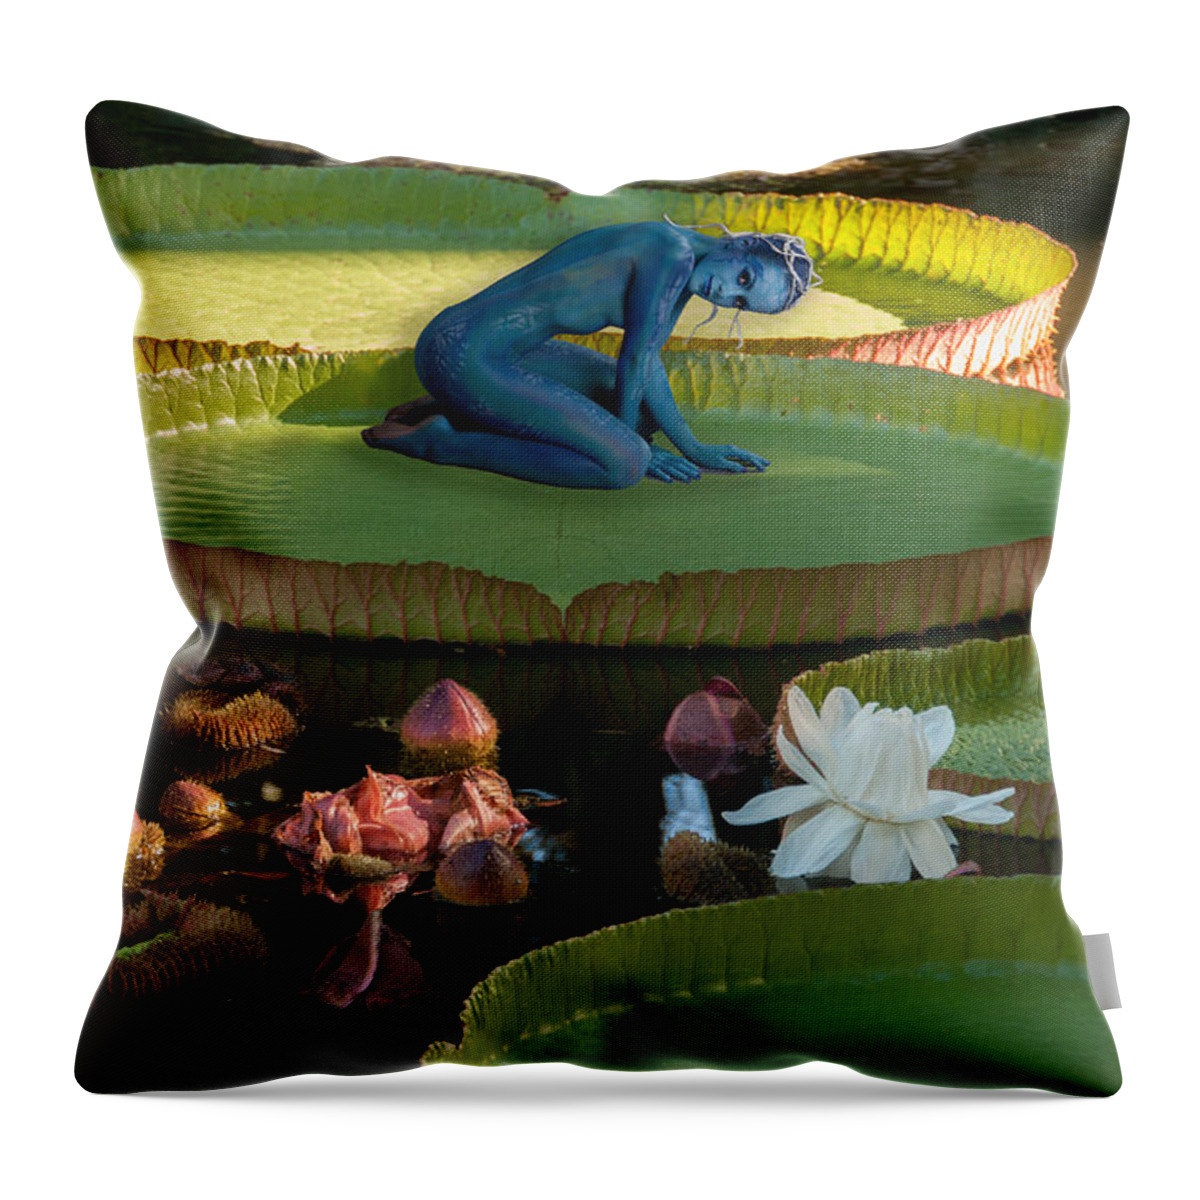 Lily Pads Pixie Girl Flowers Fauna Throw Pillow featuring the photograph Pixie girl by Carolyn D'Alessandro